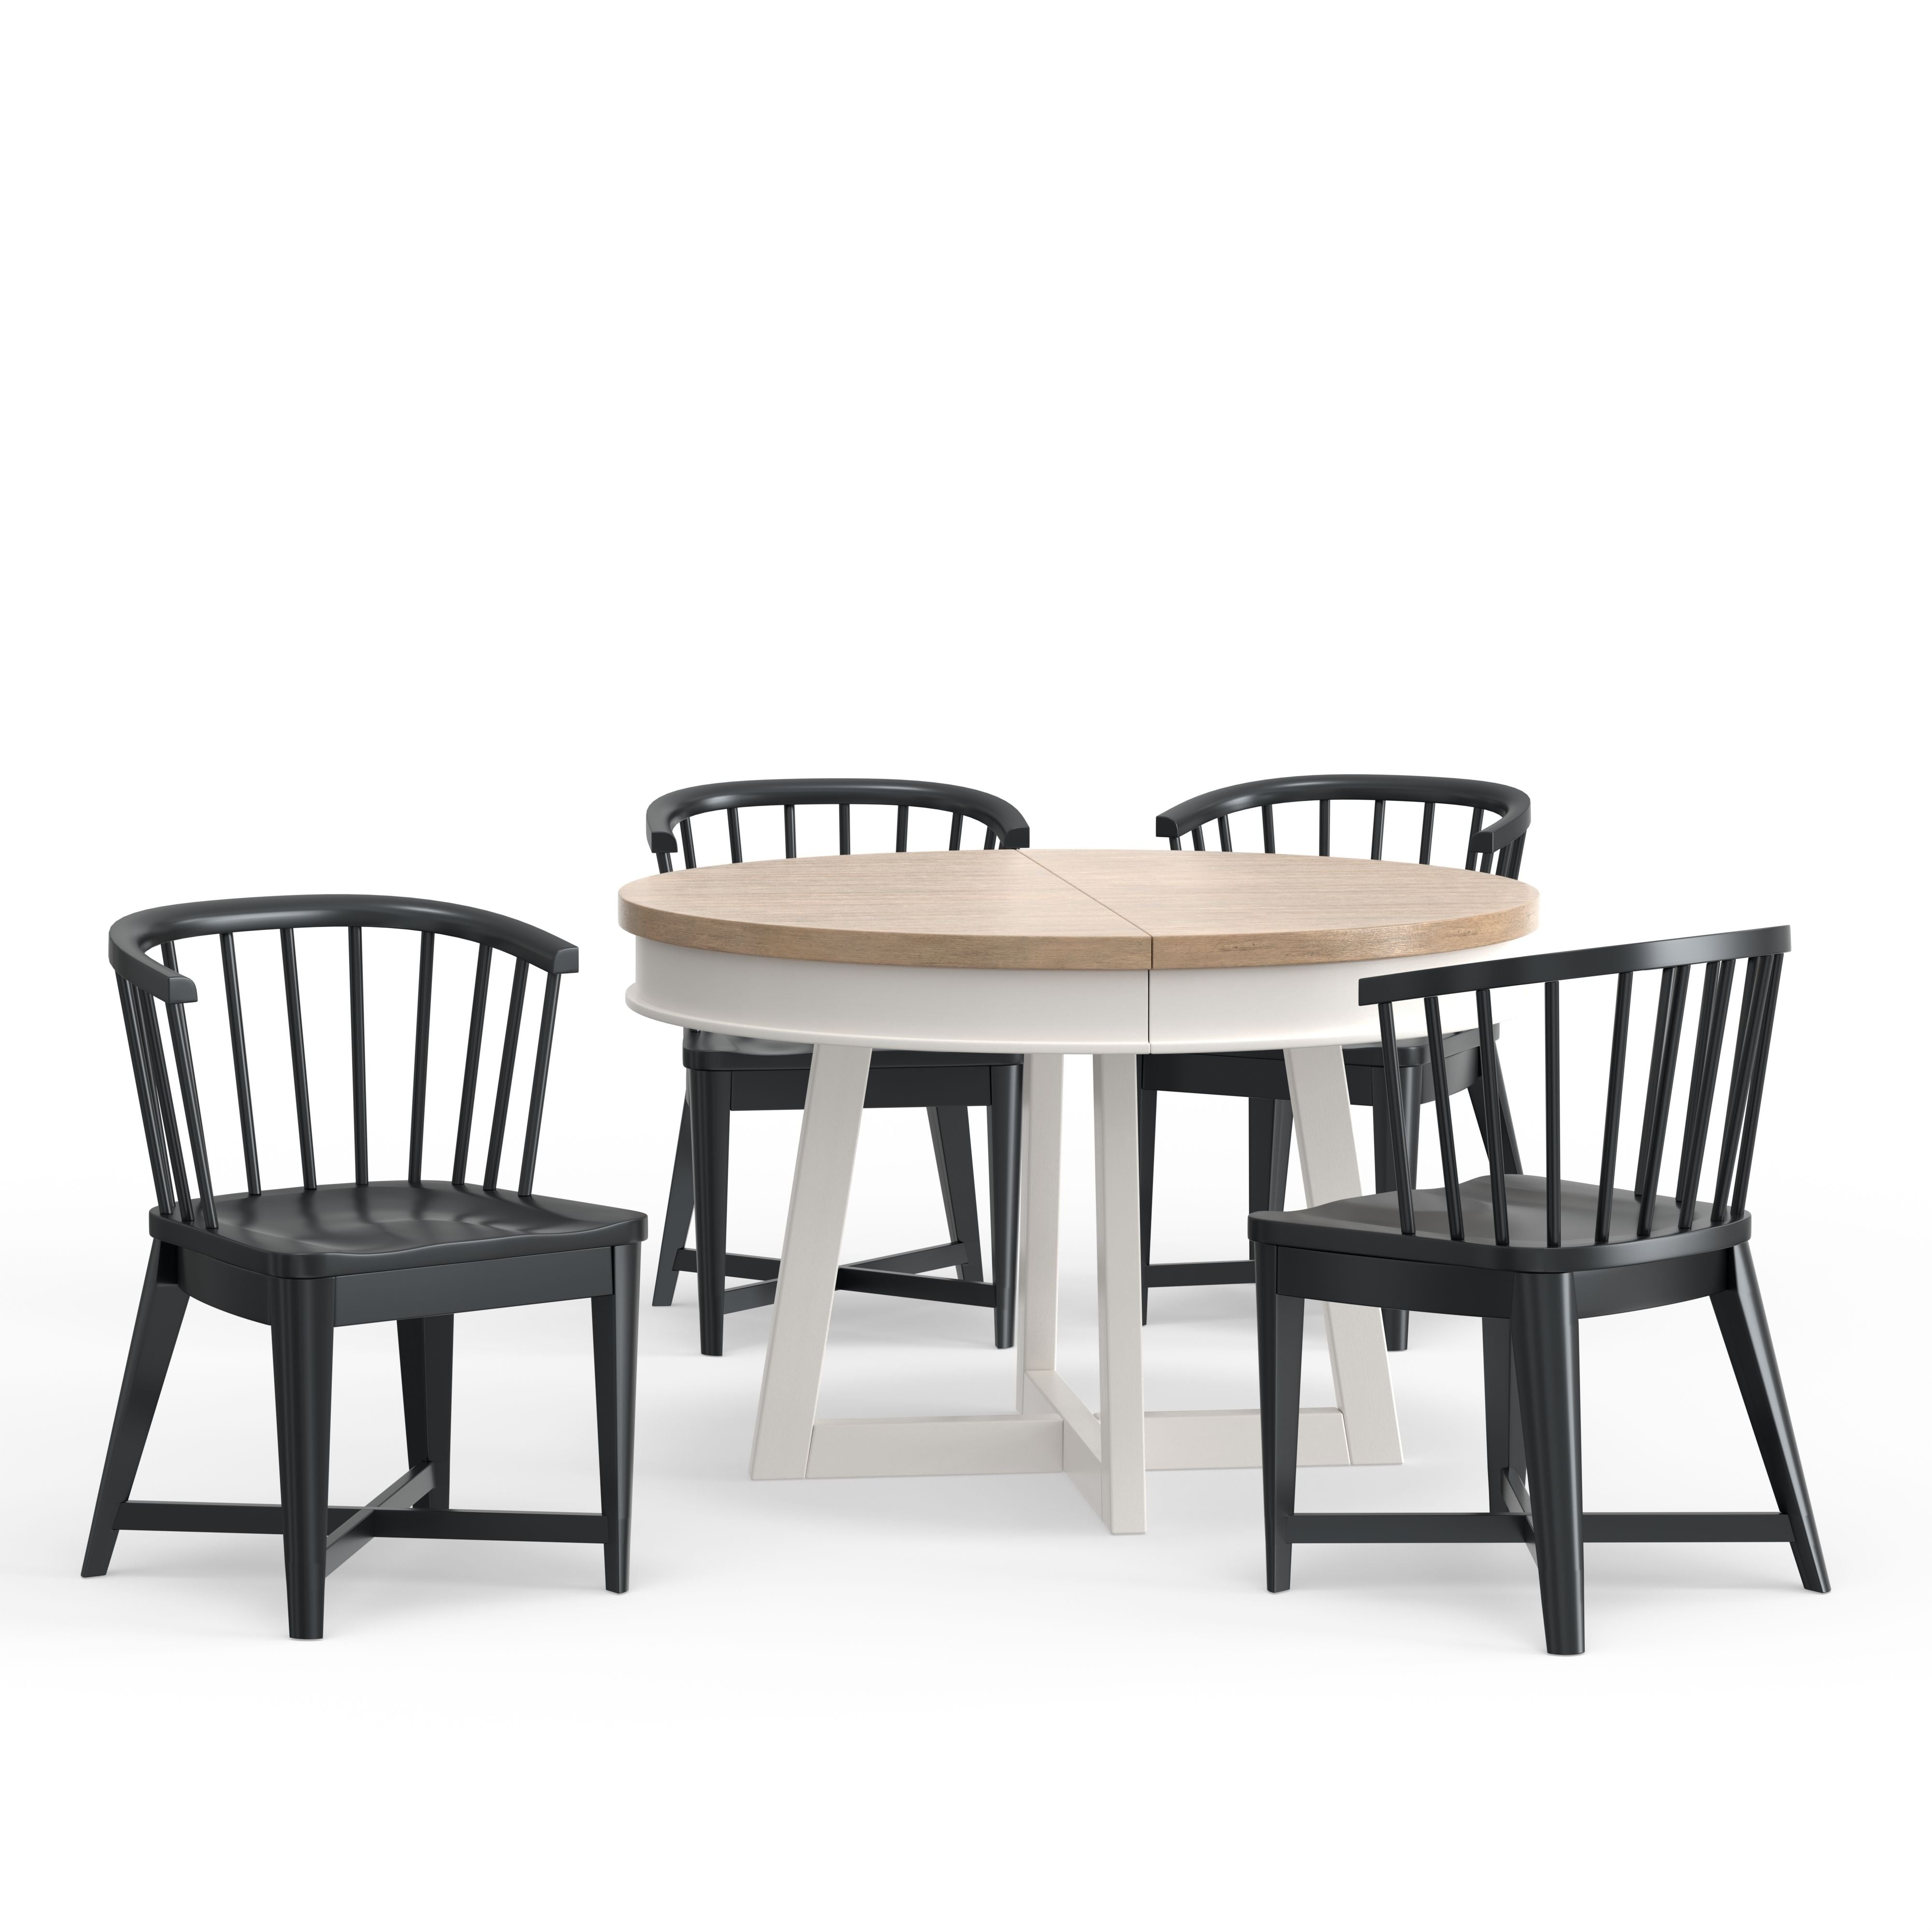 Americana Modern Dining - 48-66" Round Dining Table And 4 Barrel Chairs - Cotton